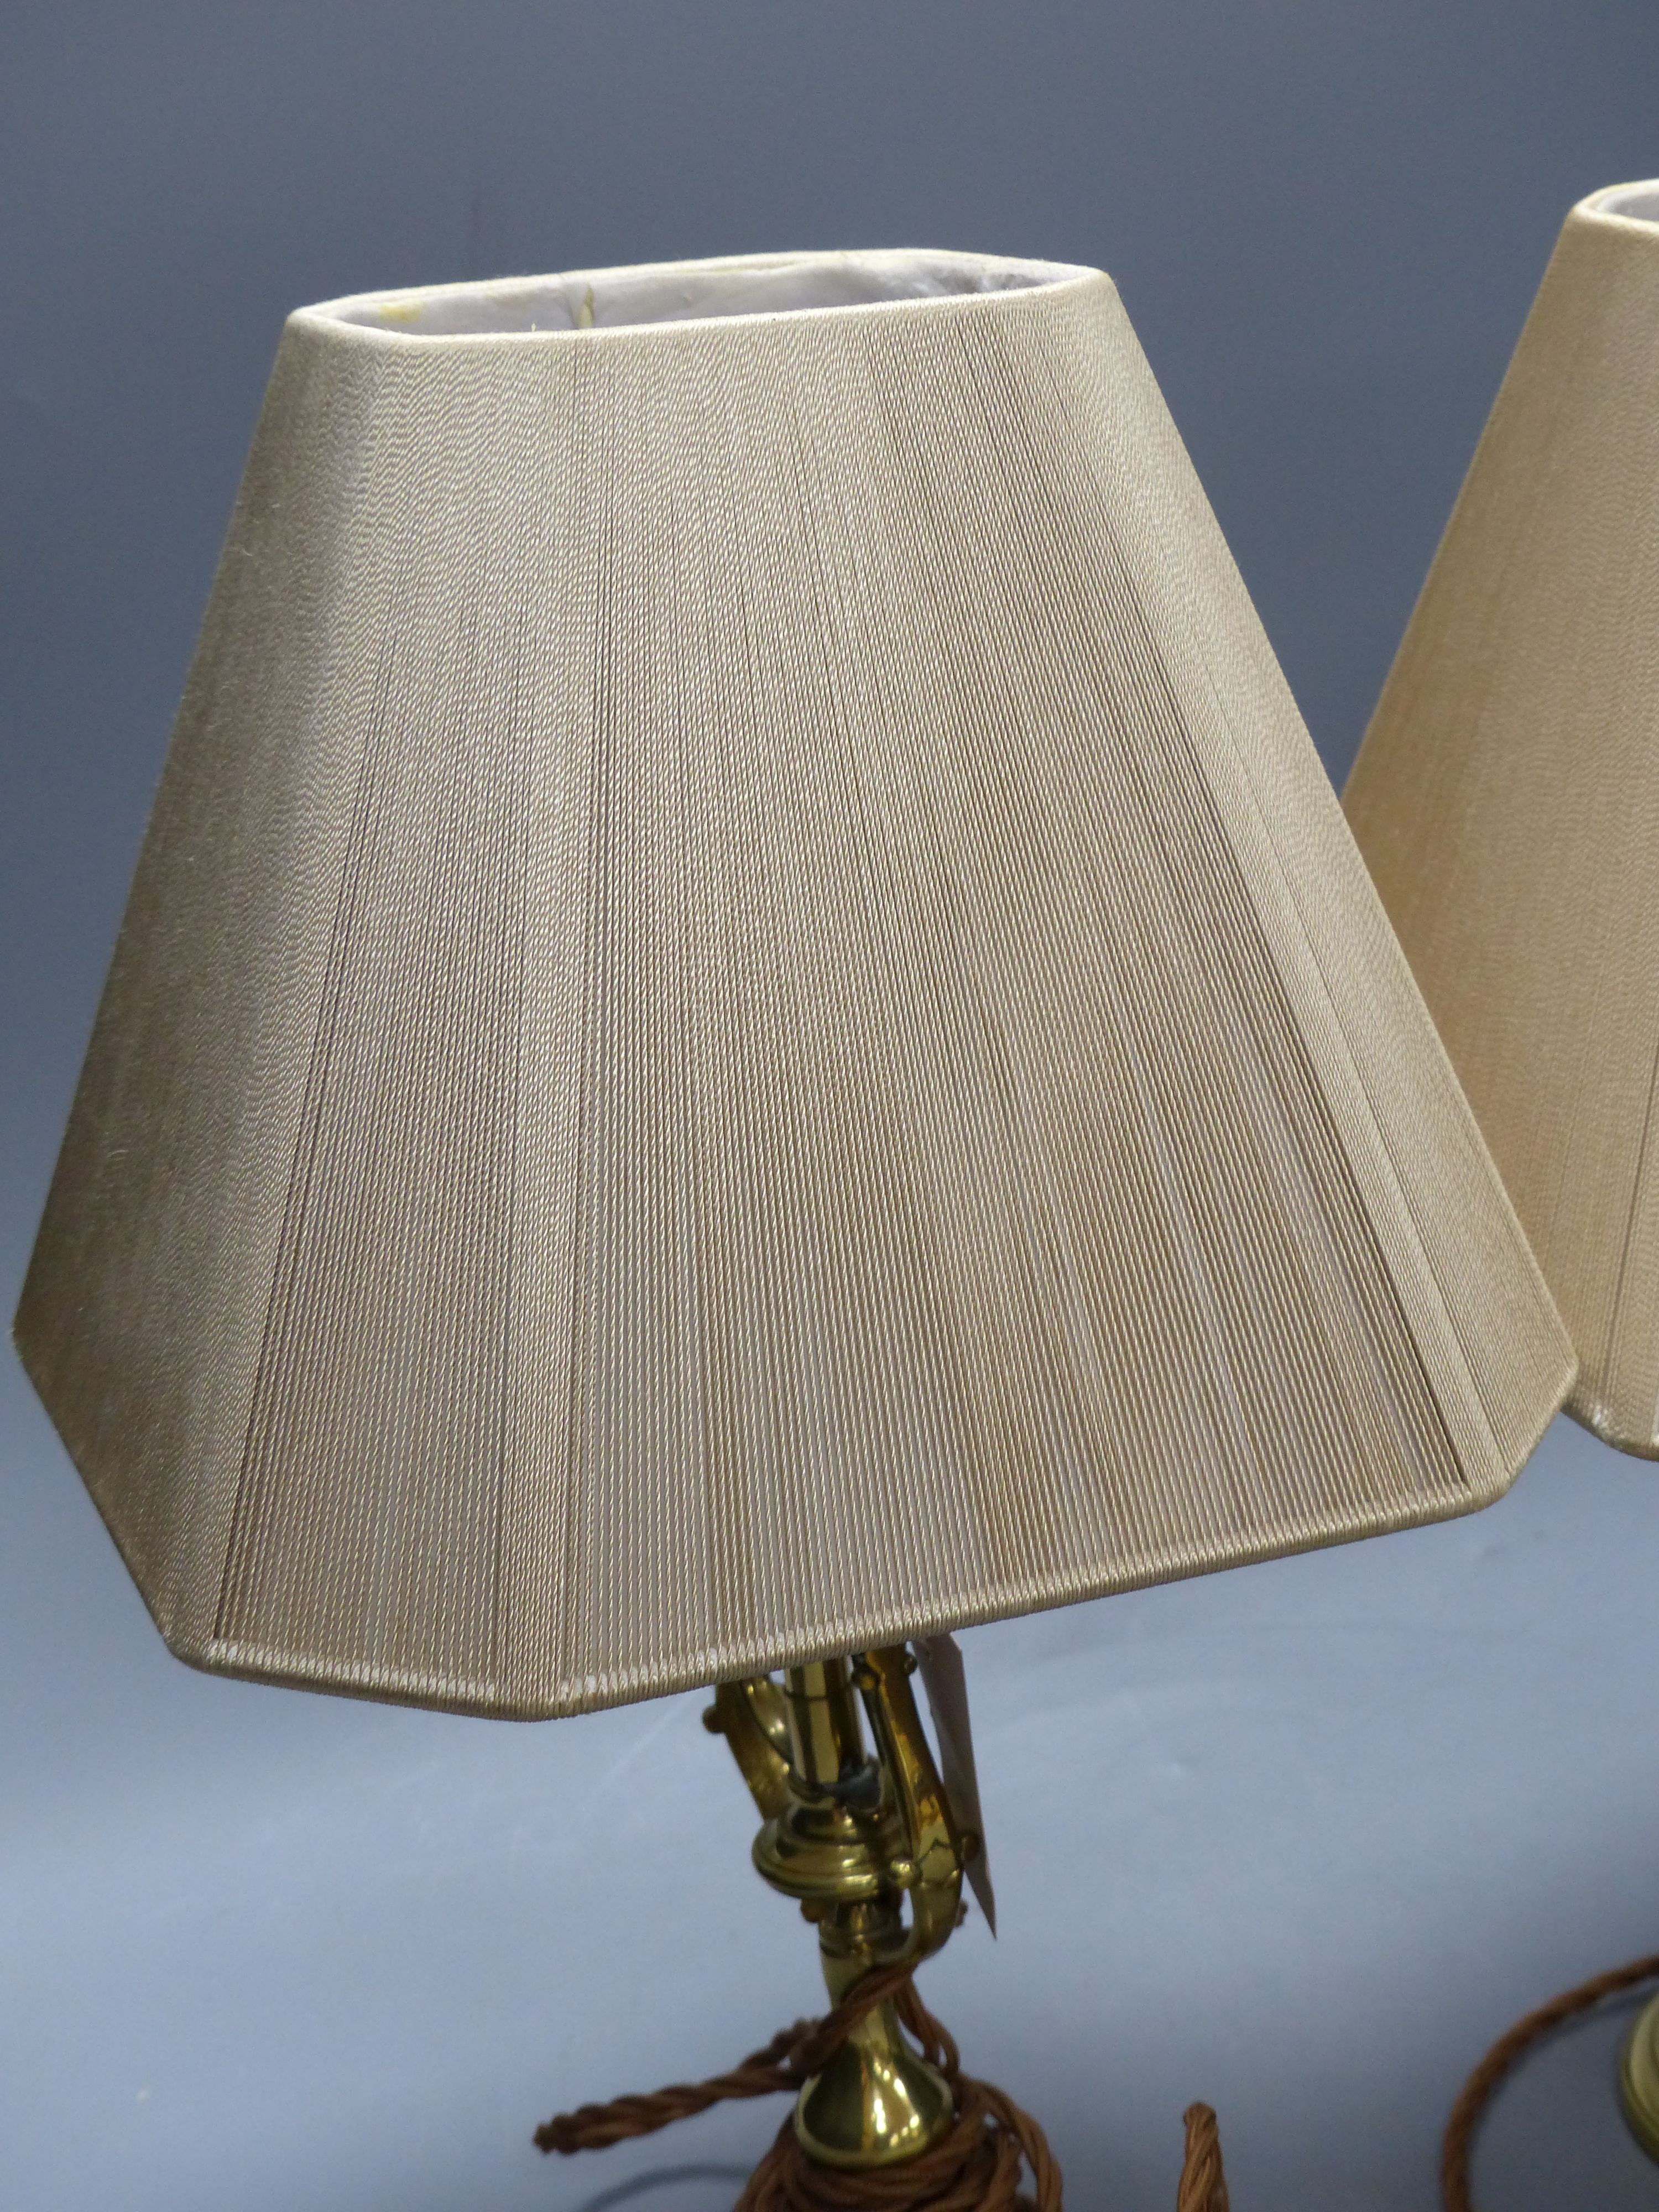 A pair of brass ship’s lamps, height 45cm - Image 2 of 4